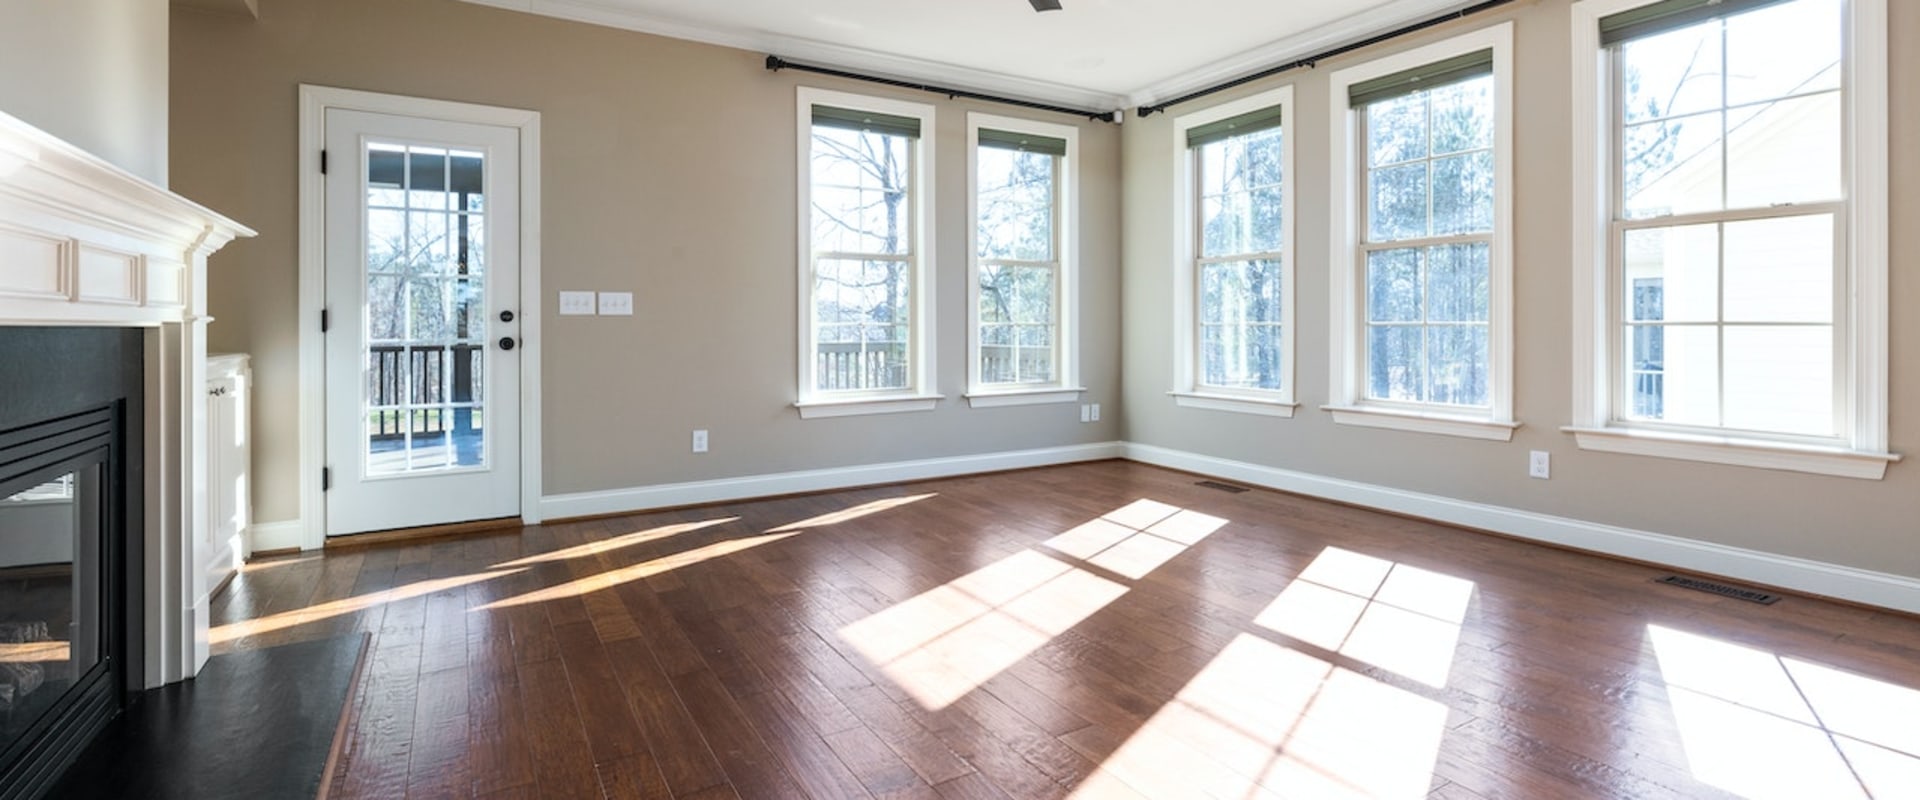 Why Is Emergency Water Damage Restoration Crucial For Hardwood Flooring In Tampa, FL?